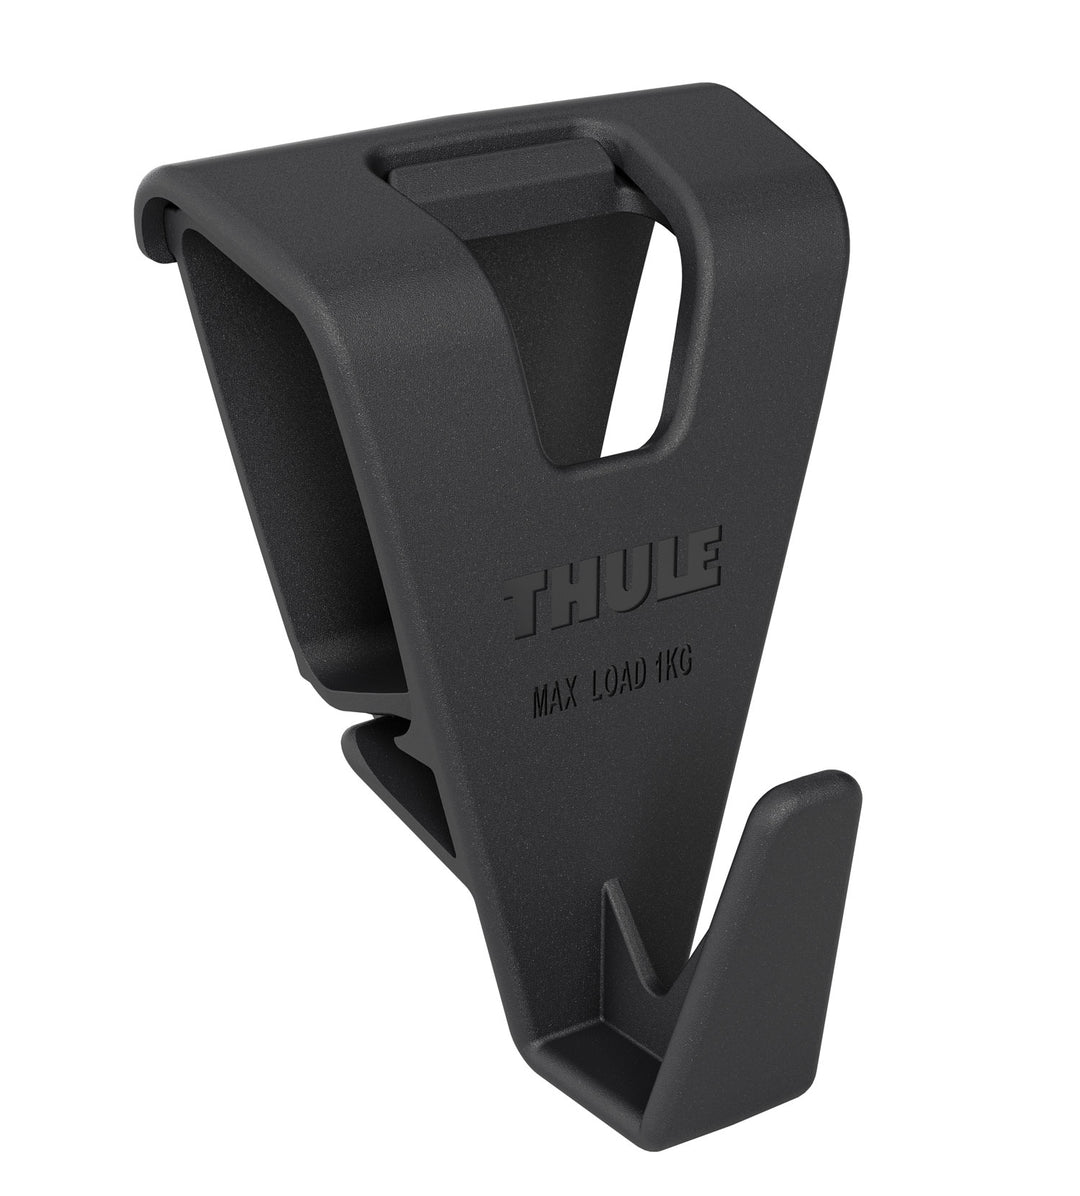 Thule dog crate leash hook for storing your dog leash or collar in a convenient easy to reach location